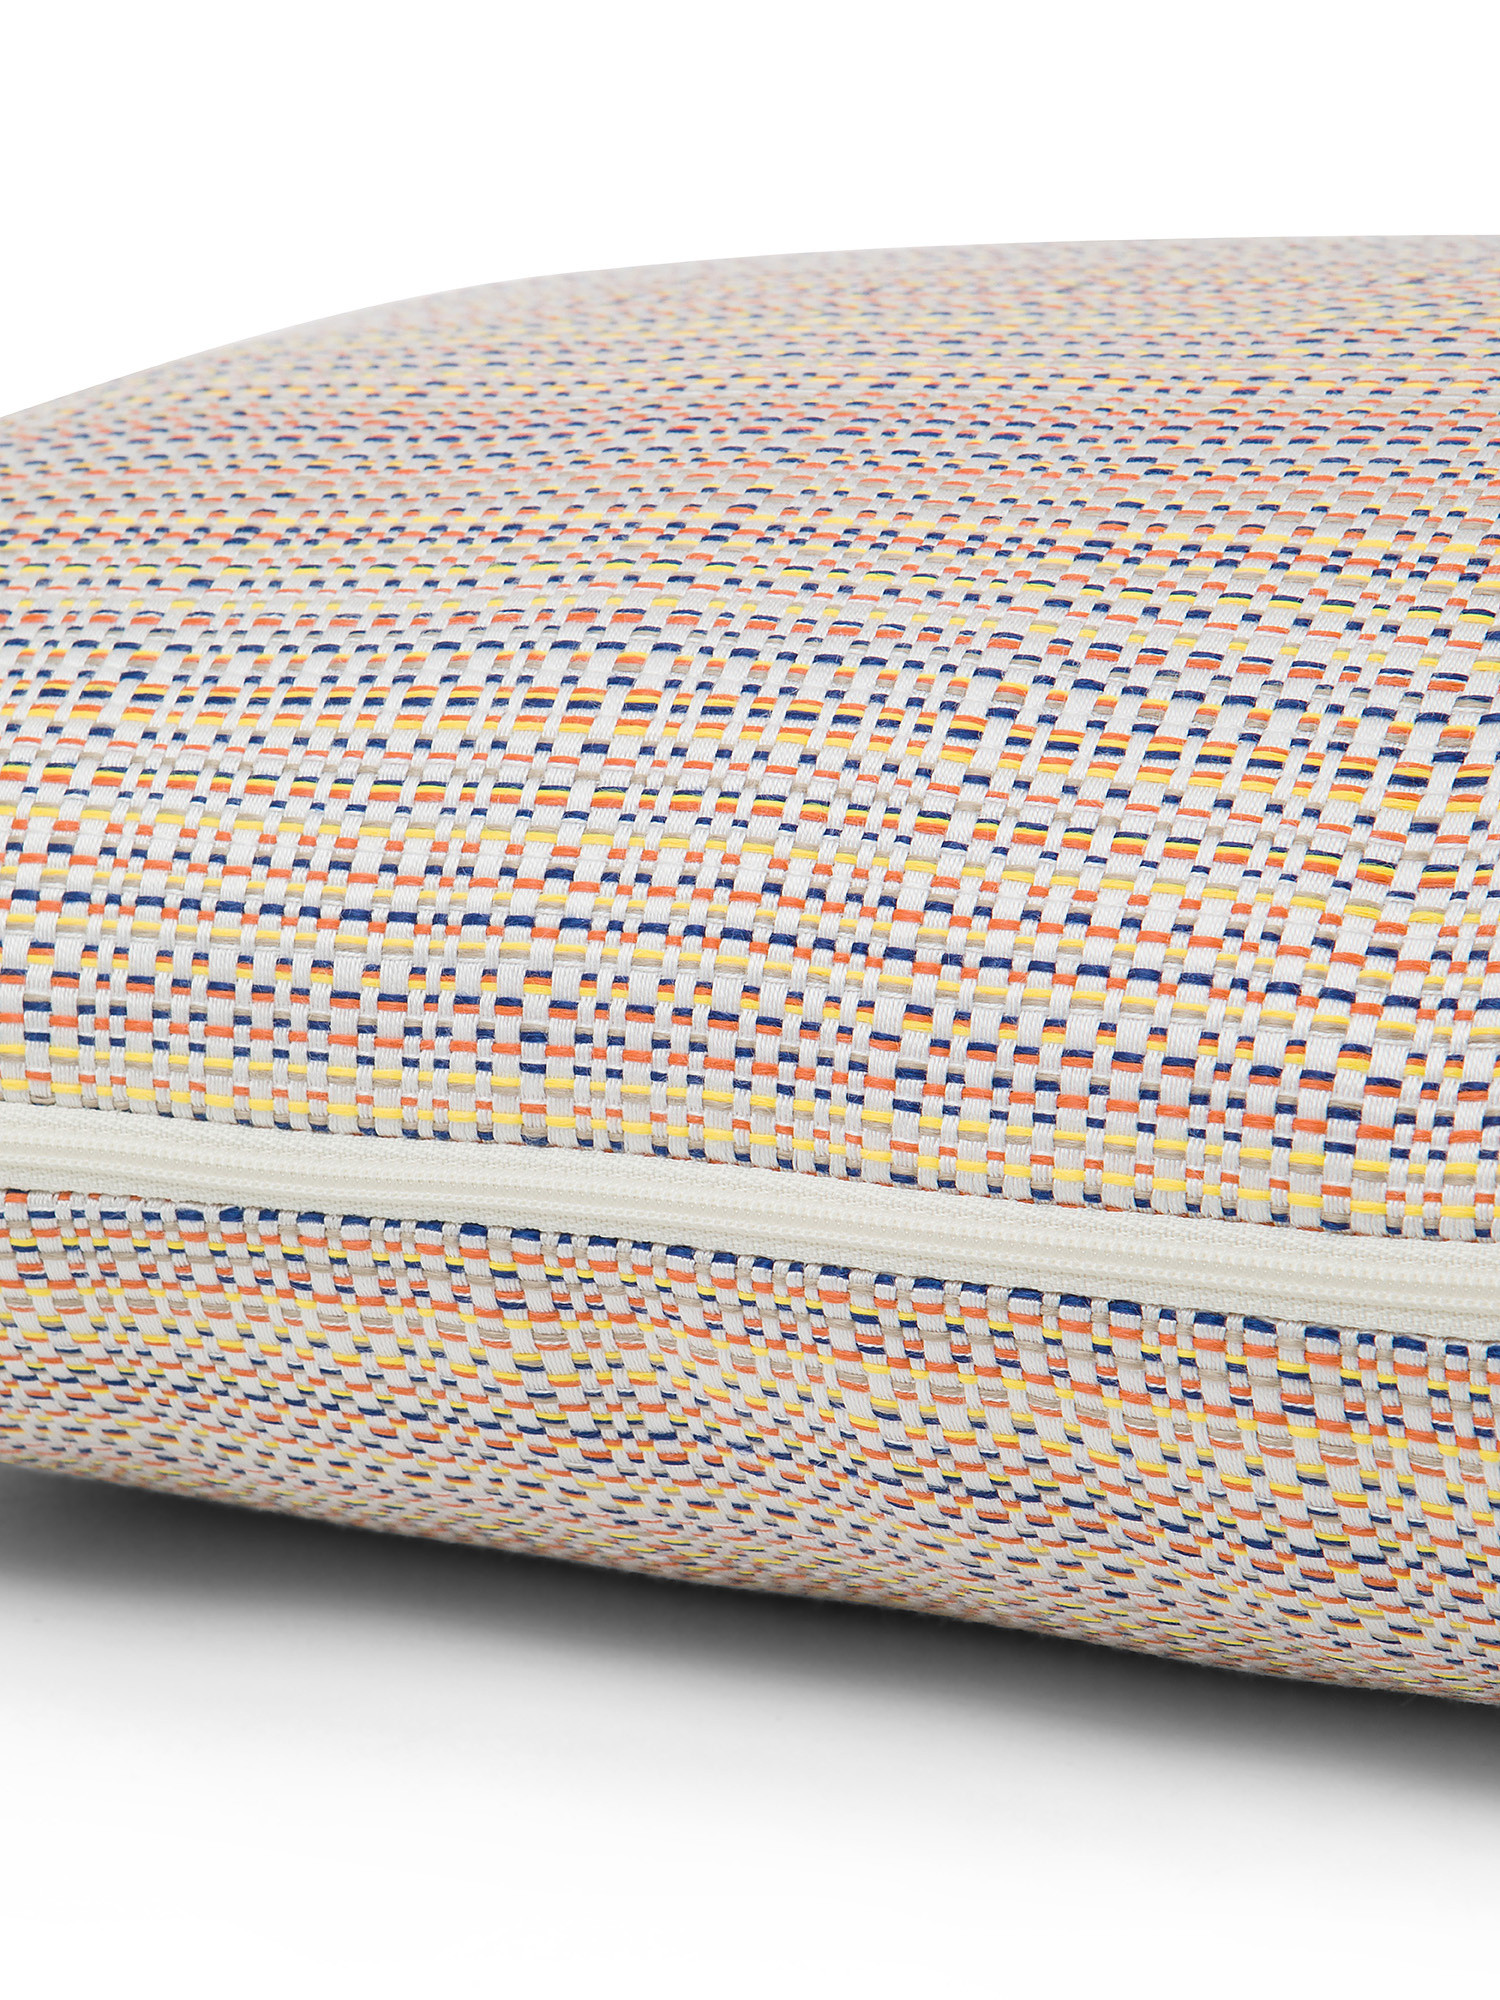 35x55 cm outdoor cushion with striped pattern, with zip and padding., Multicolor, large image number 2